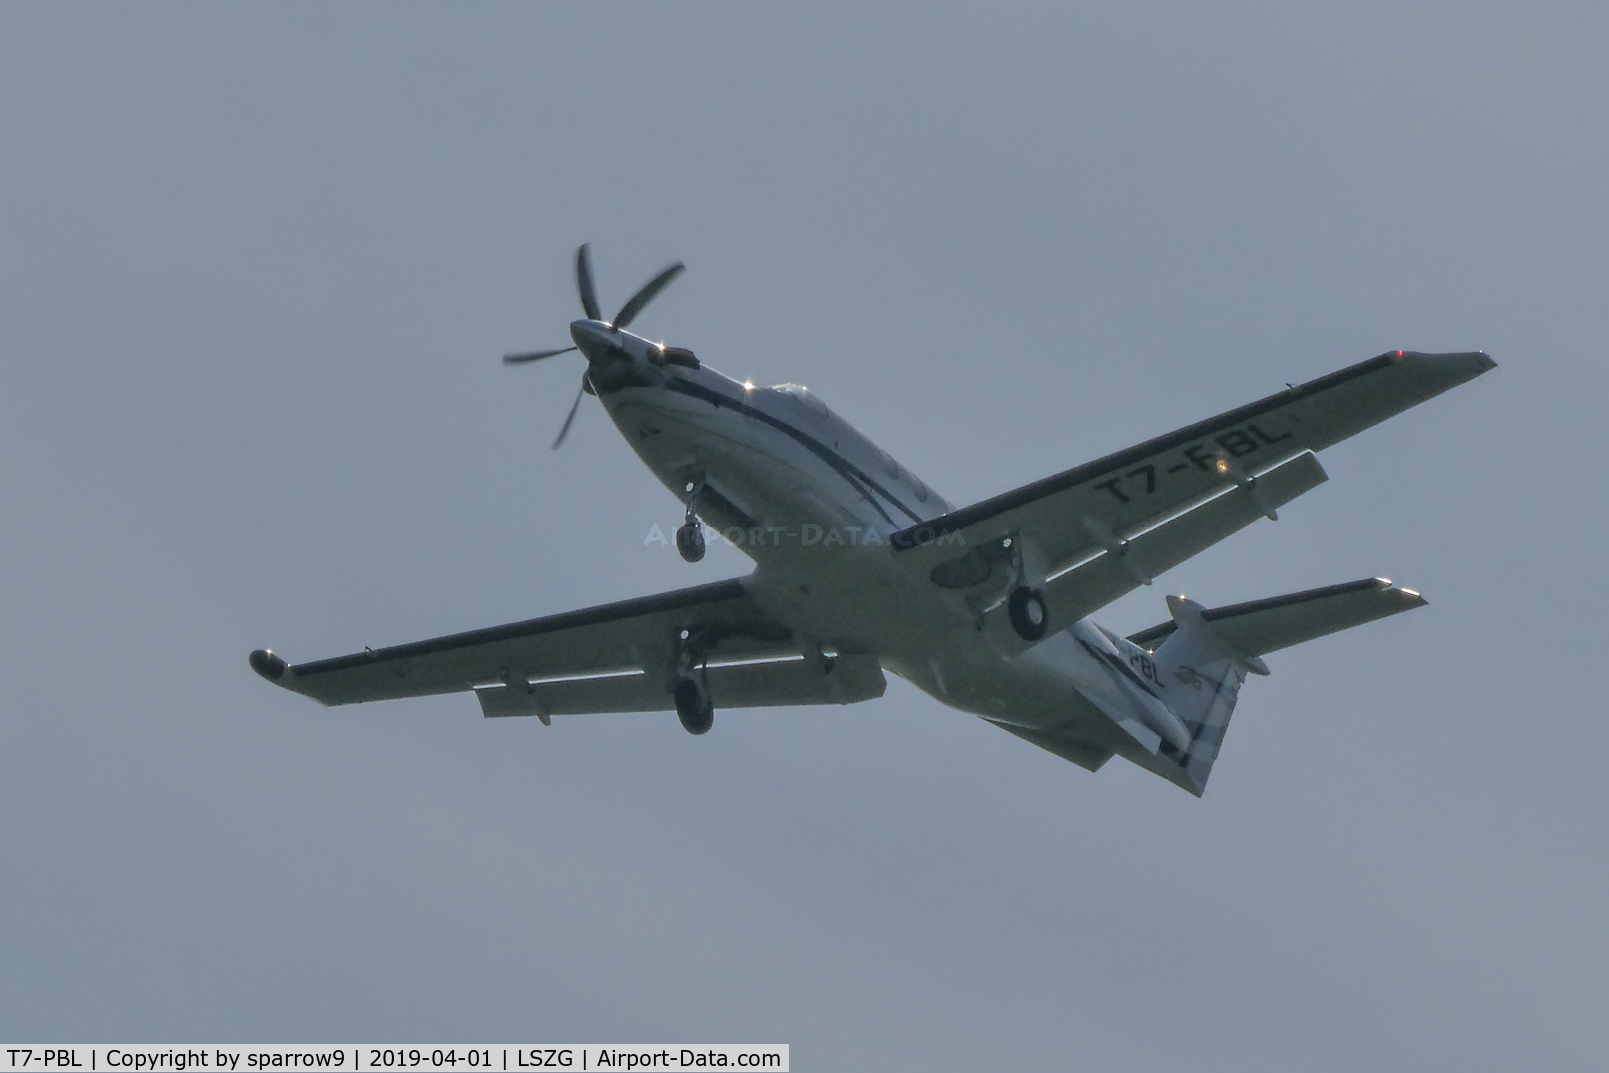 T7-PBL, 2010 Pilatus PC-12/47E C/N 1205, On approach to rwy 06 Grenchen